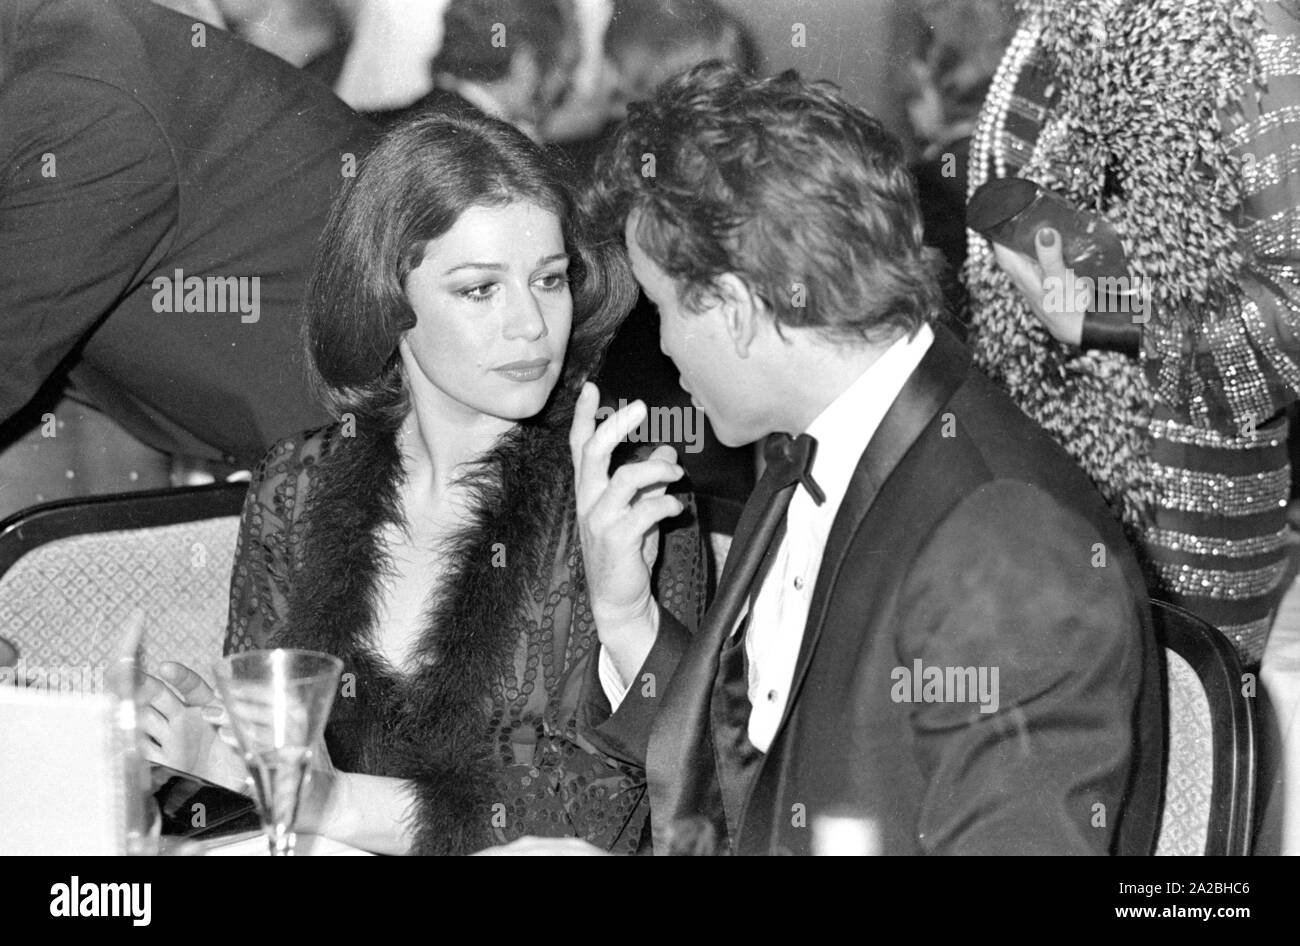 Hannelore Elsner and Horst Buchholz in conversation at the German Film Ball 1974 in the Bayerischer Hof. Stock Photo